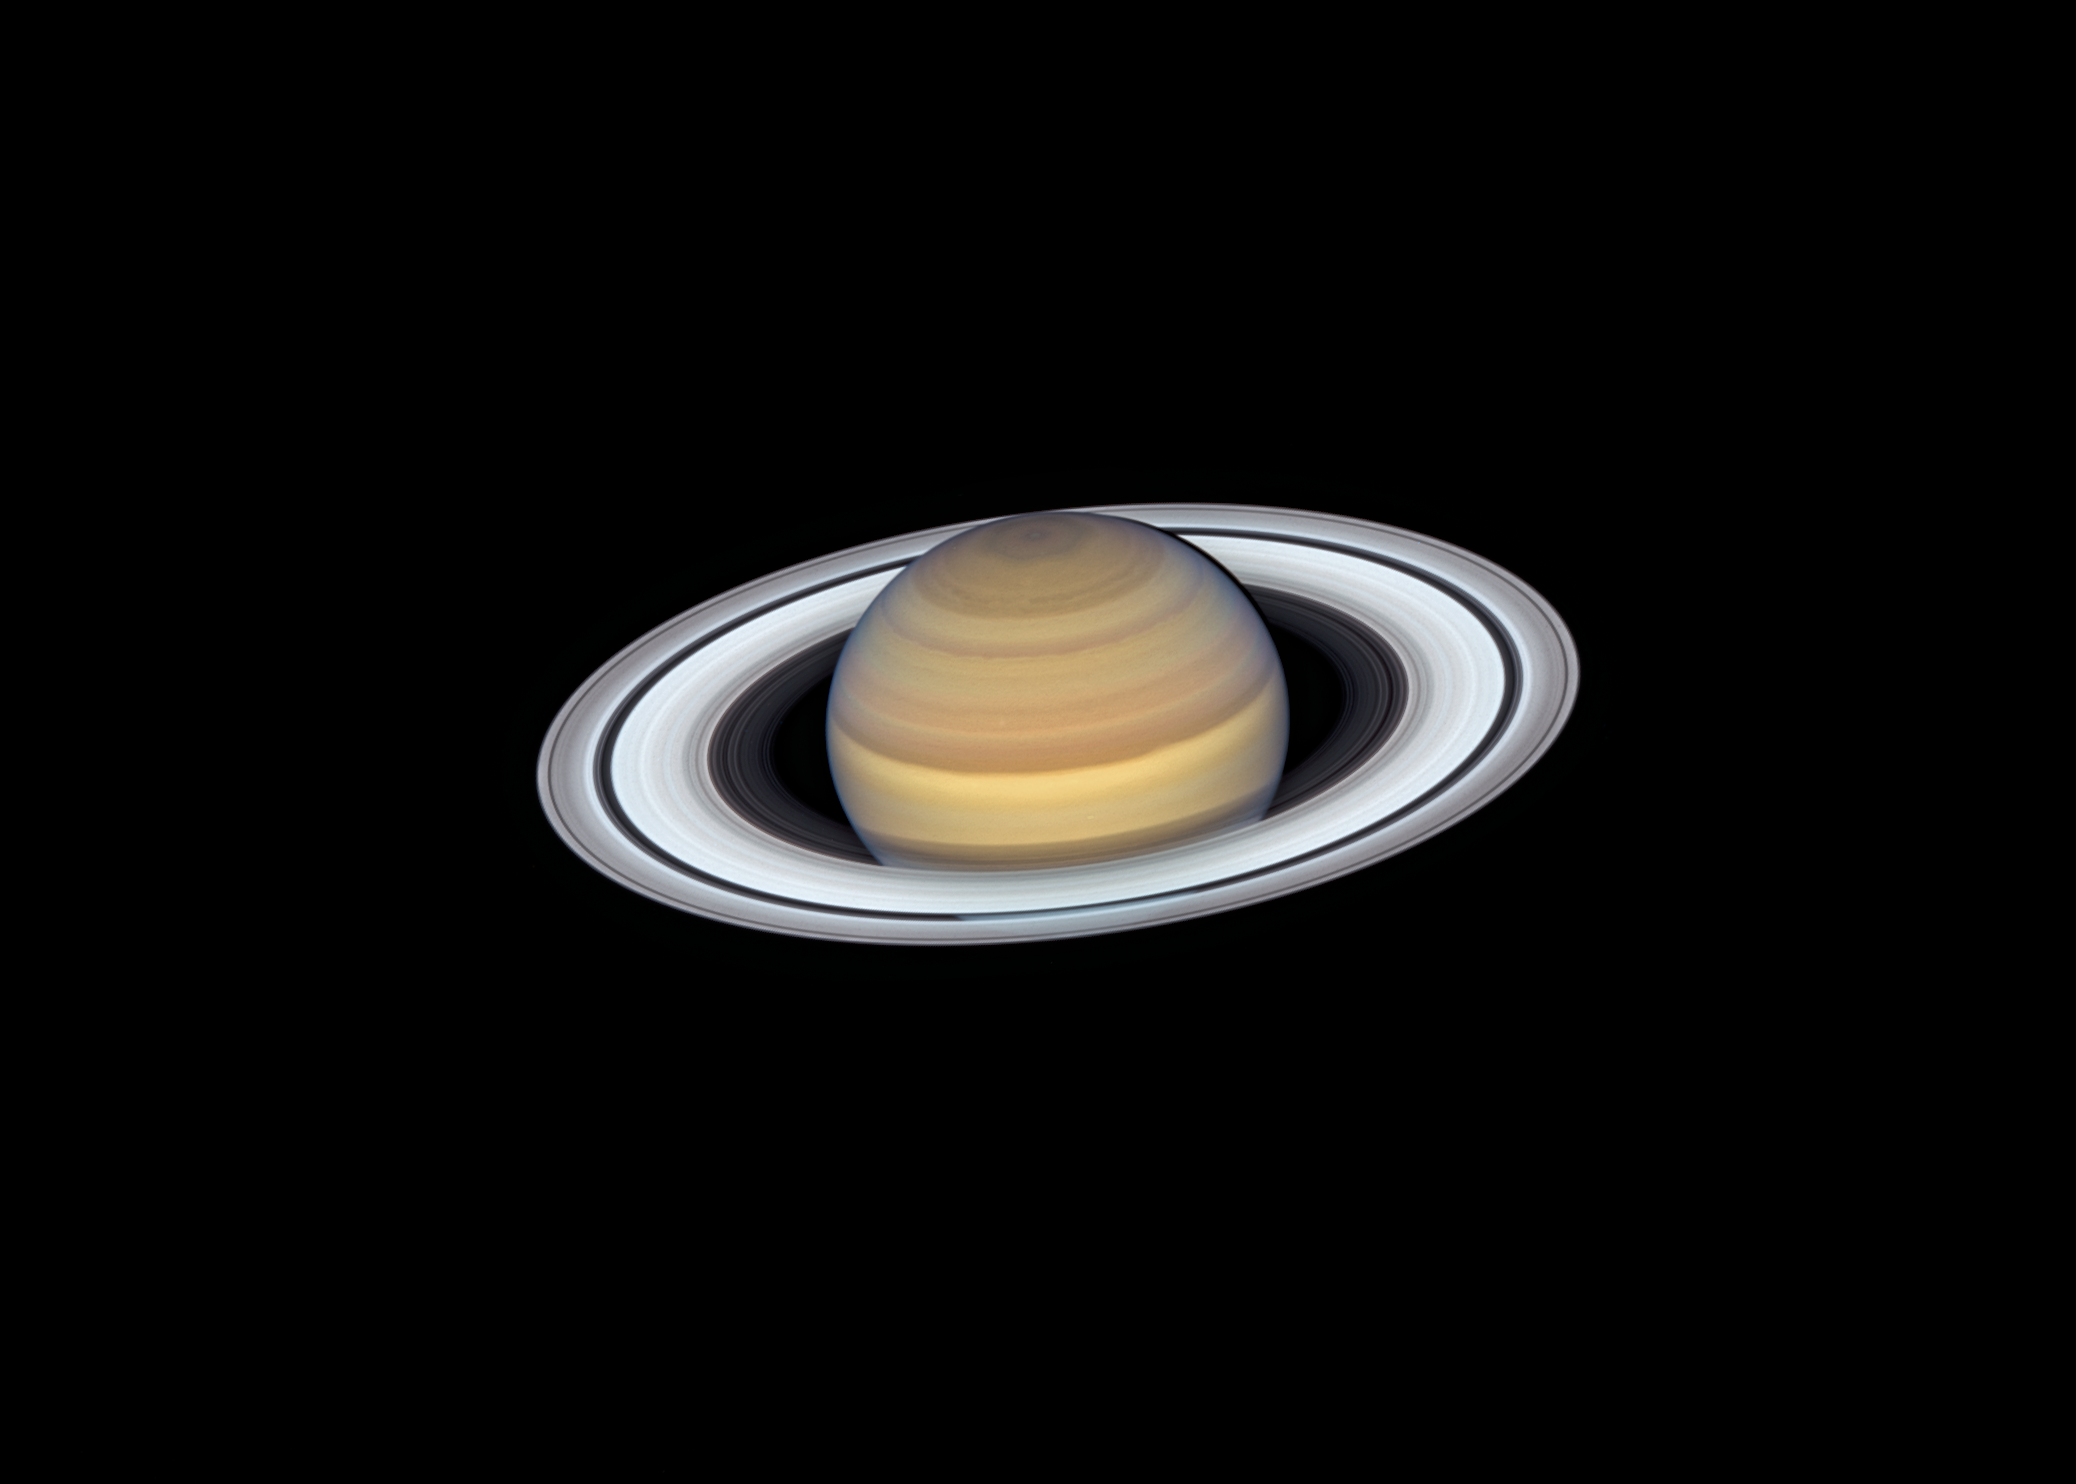 In Saturn's Rings - In recognition of Earth Day 50th, always beautiful even  in troubled times. Frame from the film. Source images from Himawari 8/JMA,  NASA/Hubble/Mellinger | Facebook